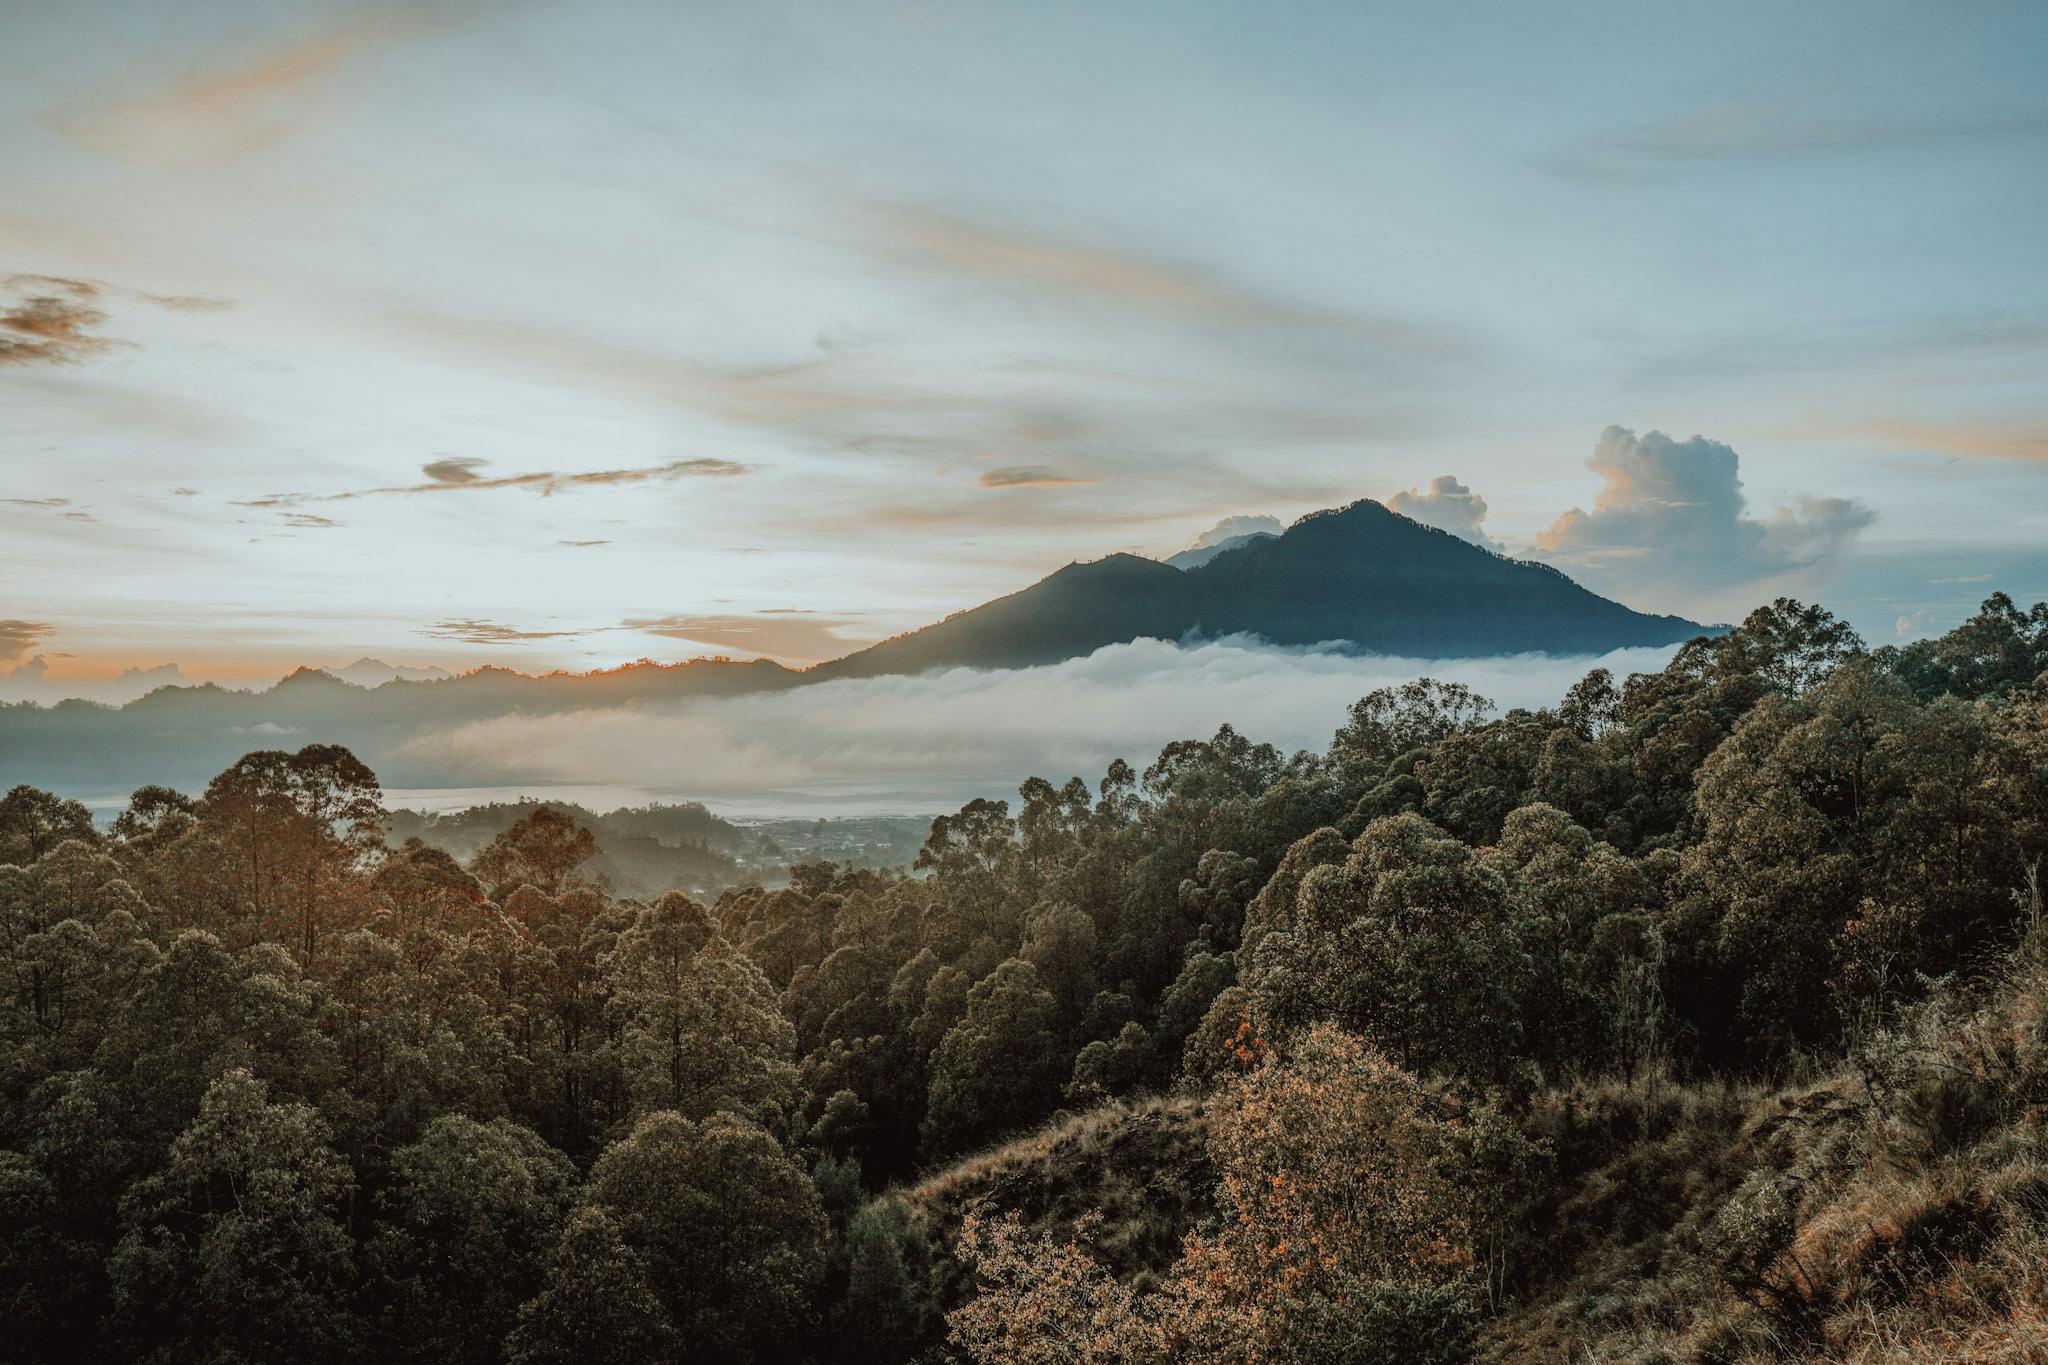 Mount Batur, Bali's most popular volcano has hidden routes up that few travellers know of